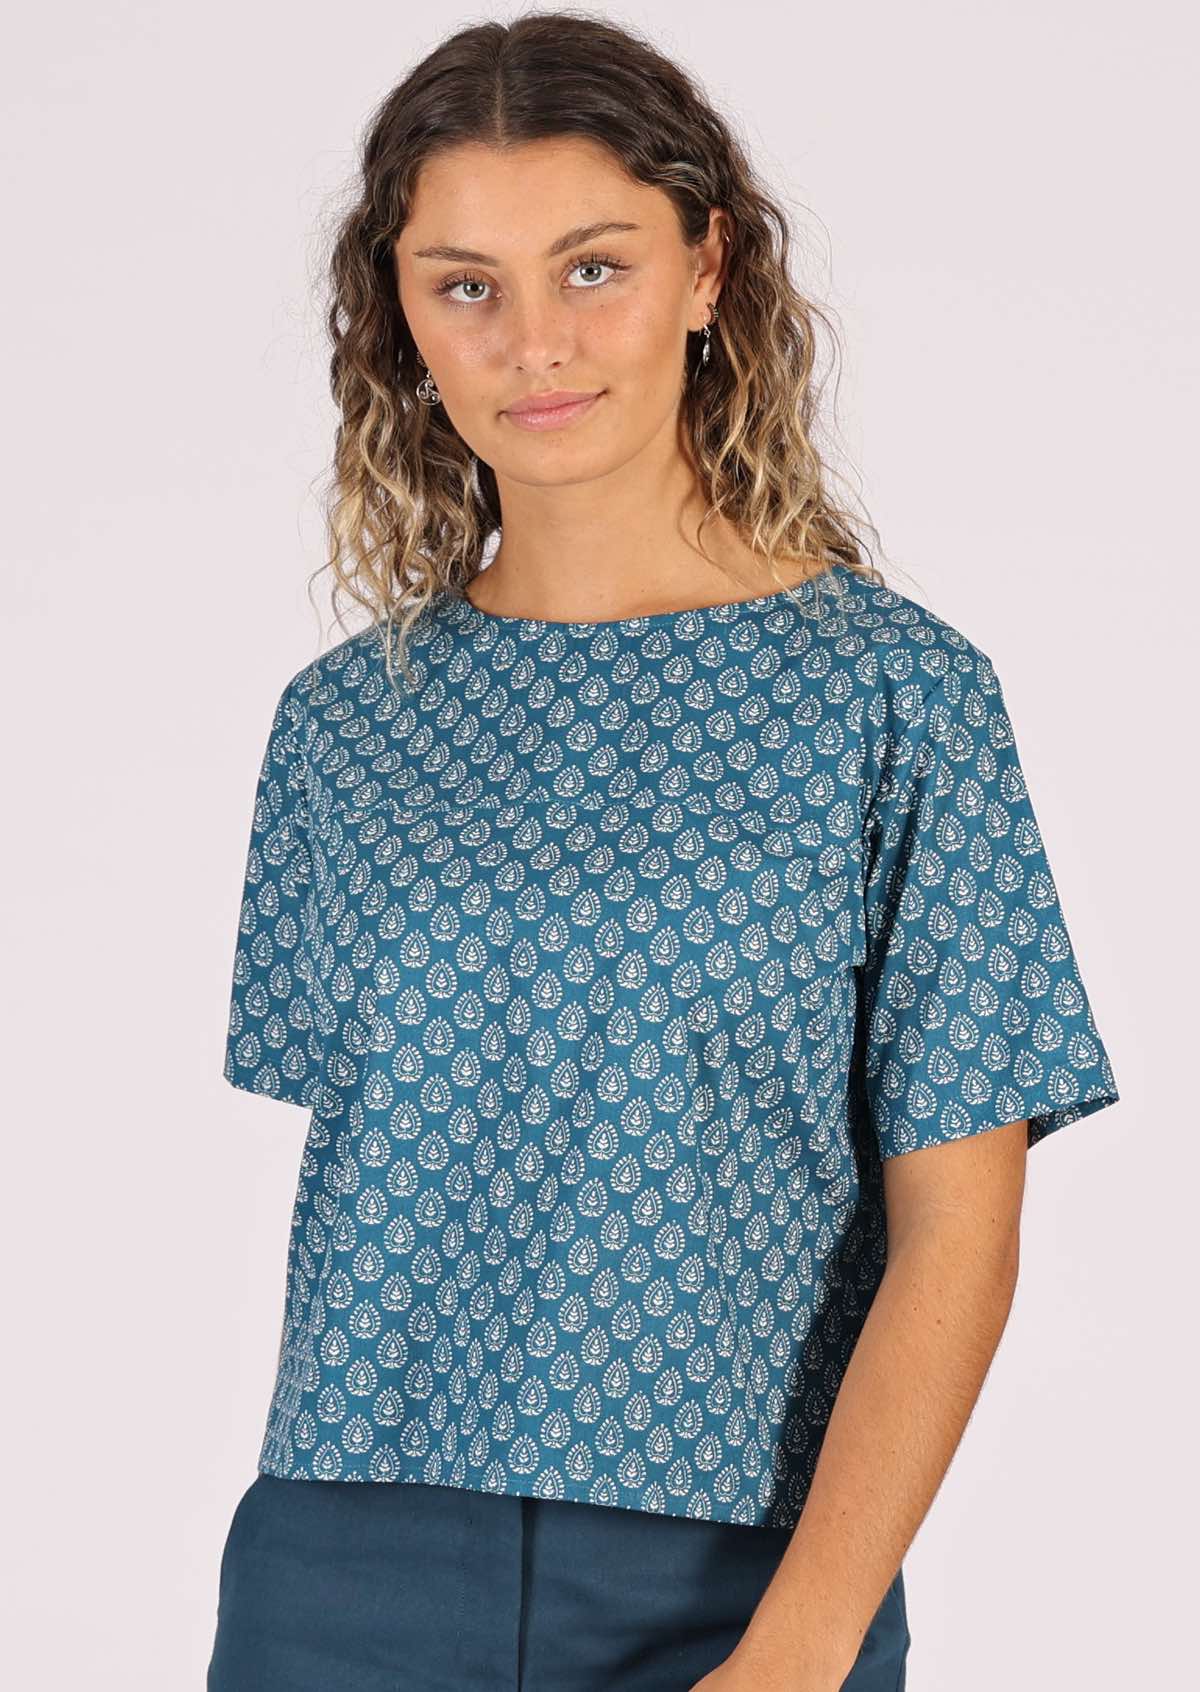 Relaxed fit cotton top with delicate white print on blue